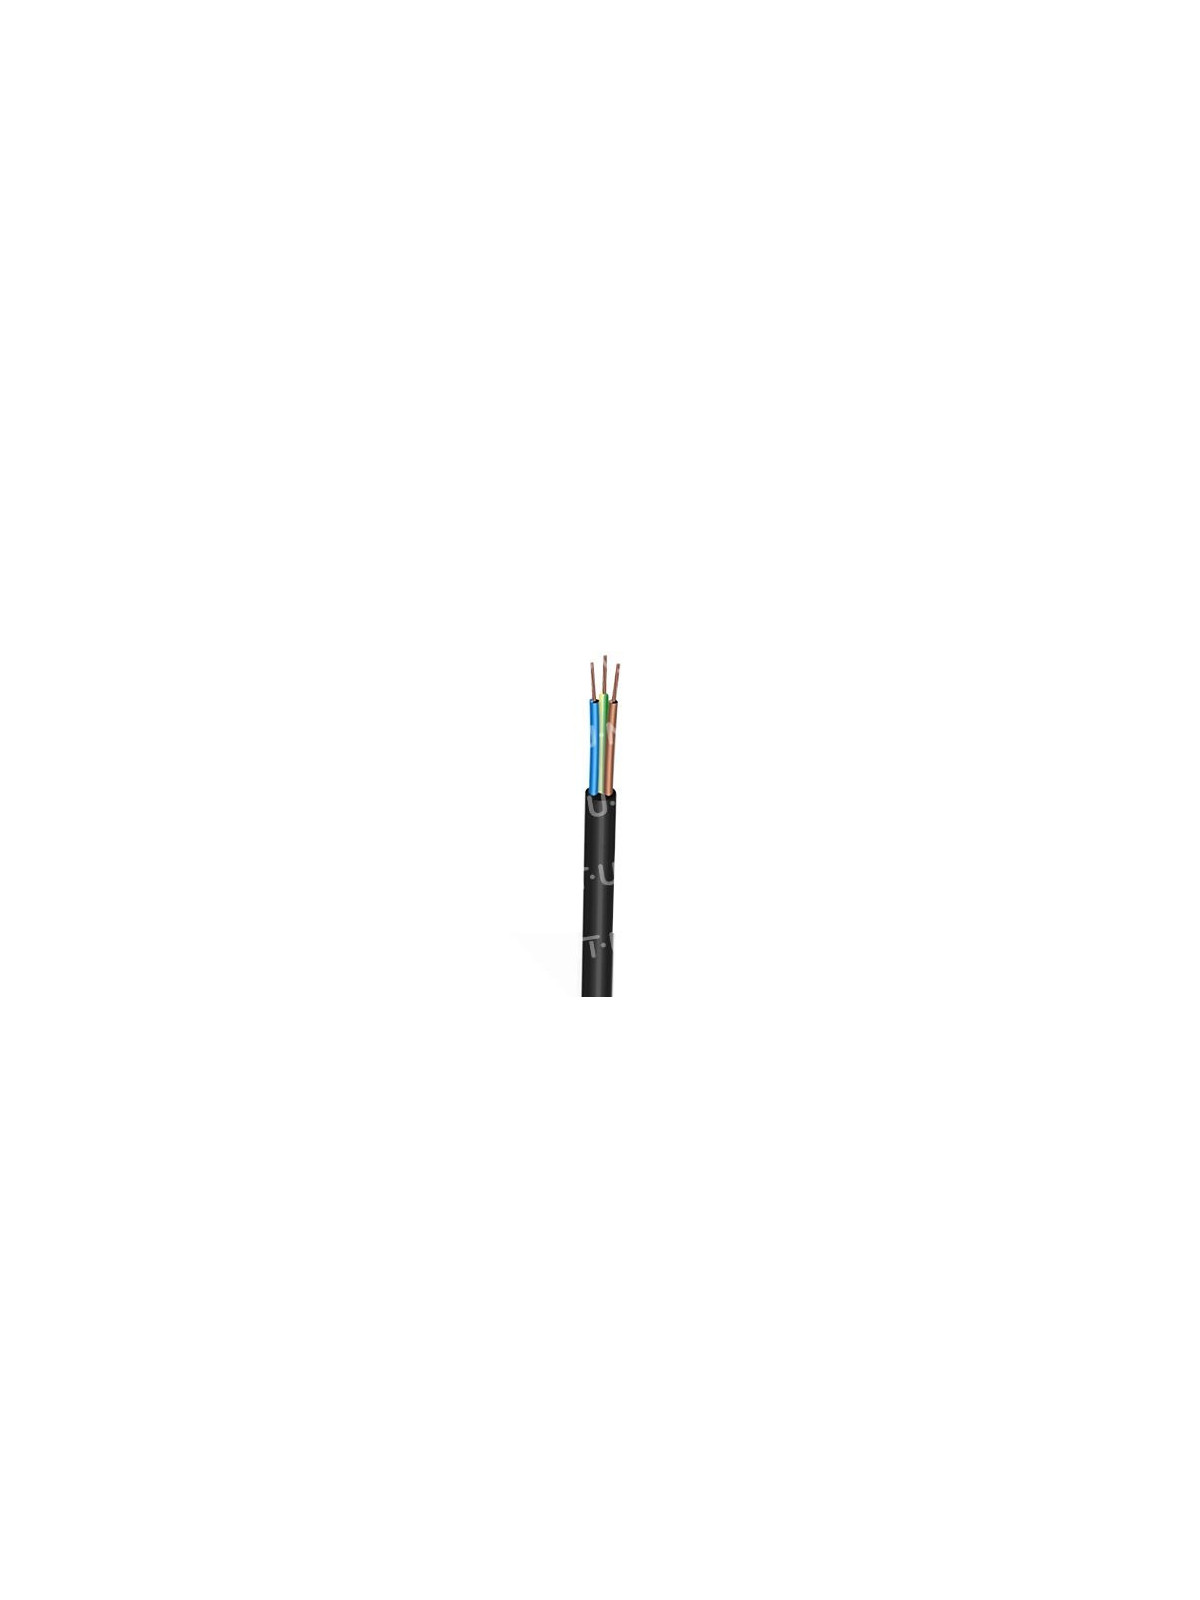 Flexible Cable H05RR-F 3G 2,5mm² - 1m